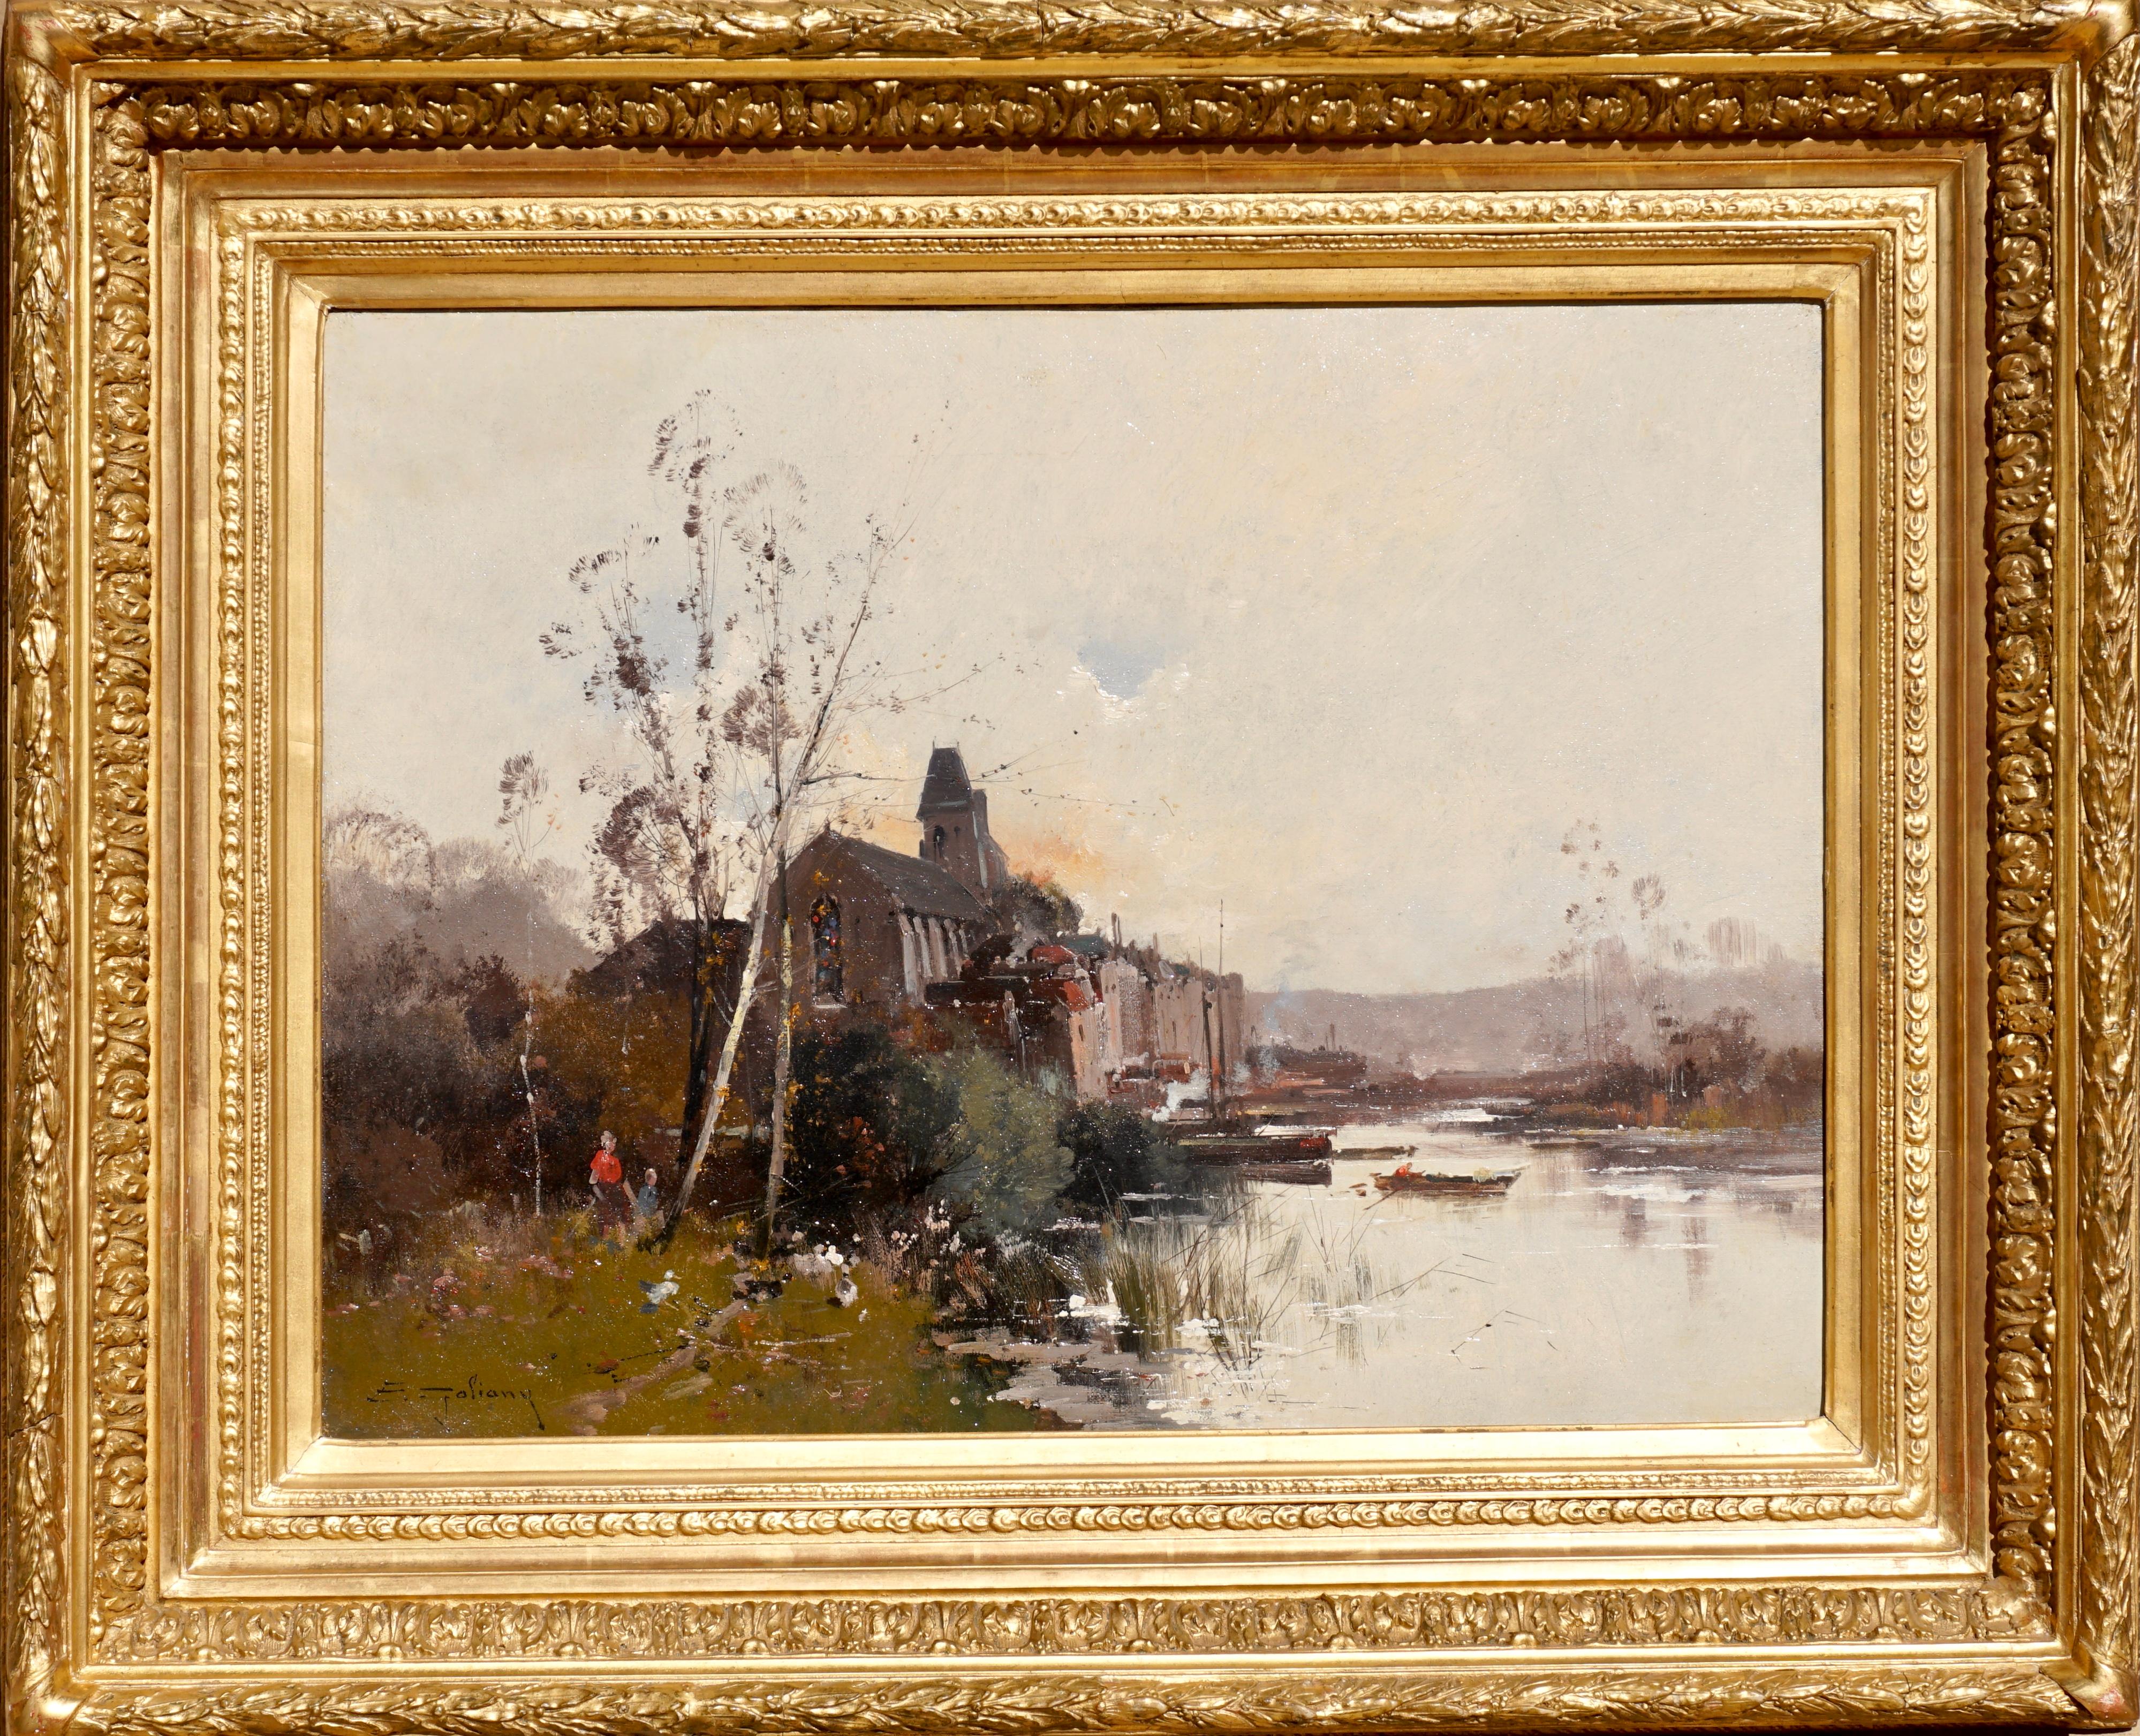 Eugene Galien Laloue (French, 1854-1941) Large oils on canvas landscape painting of the outskirts of Paris on the Seine River with figures and buildings.

Let Of The Sun, Les Andelays, Seine, Oil On Canvas Painting. 

Signed With Pseudonym “E.